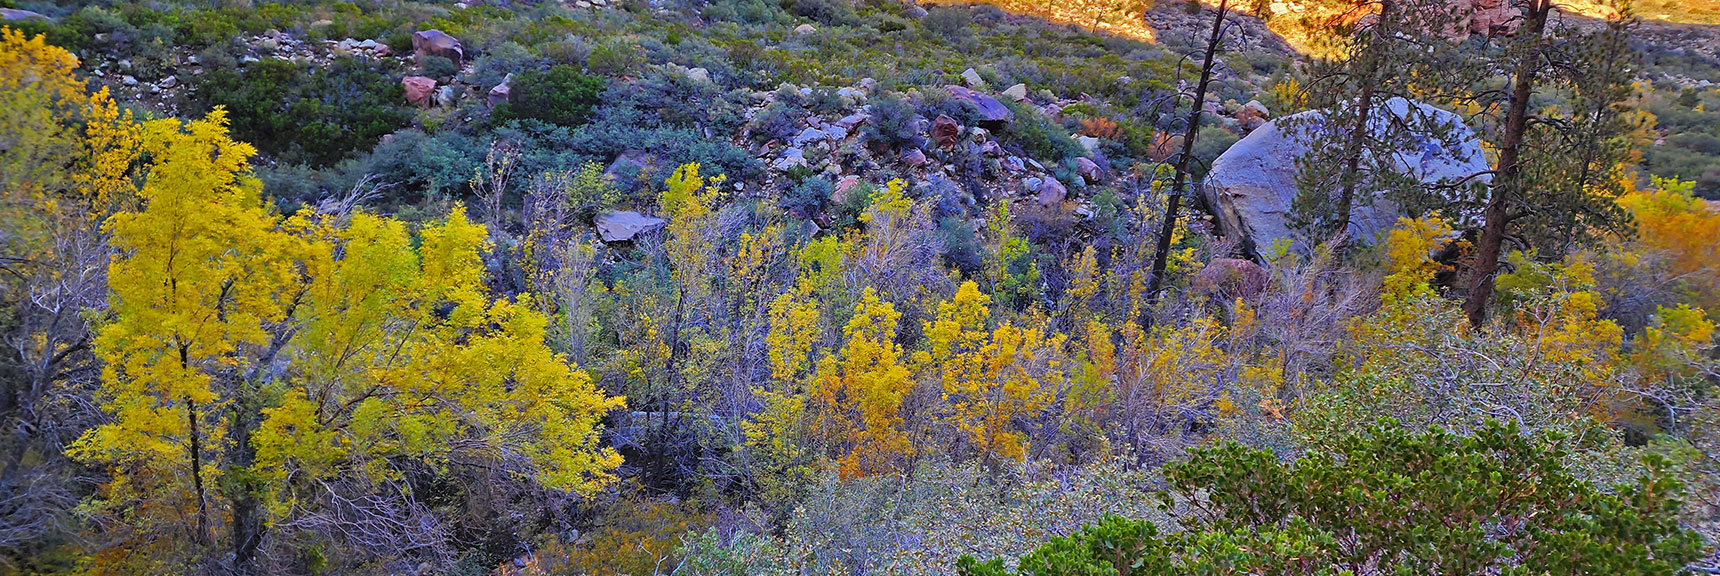 Fall Trees in the Base of Pine Creek Canyon's South (Left) Branch. | Rock Climber Observations | Pine Creek Canyon | Rainbow Mountain Wilderness, Nevada